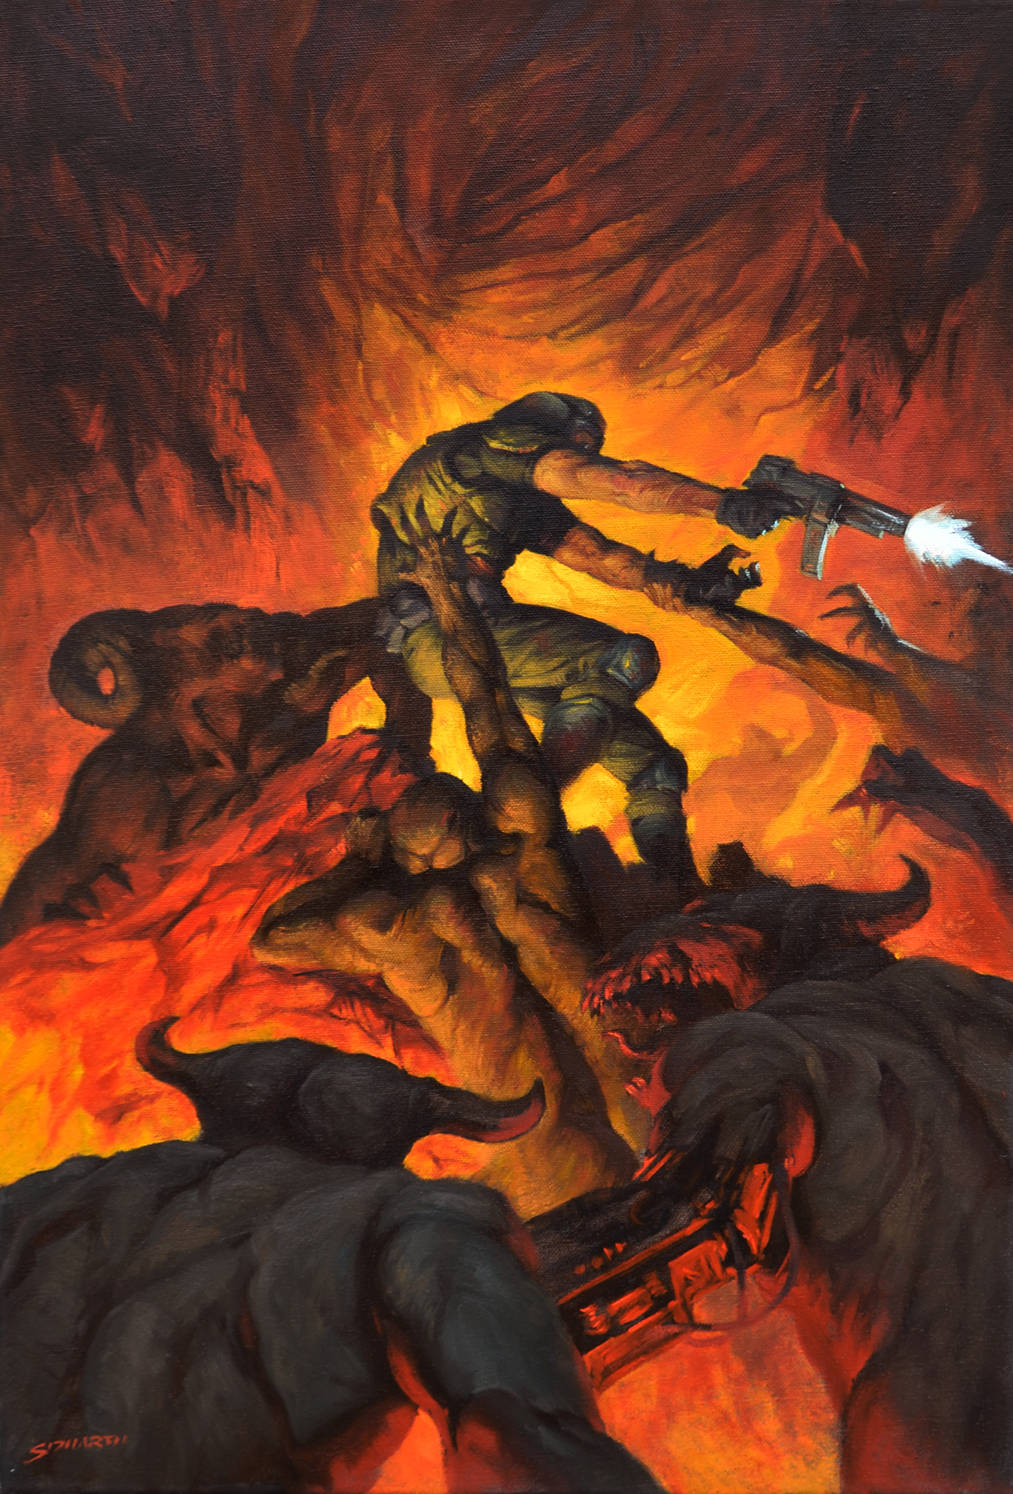 A Painting Of A Man In A Fire With A Sword Wallpaper